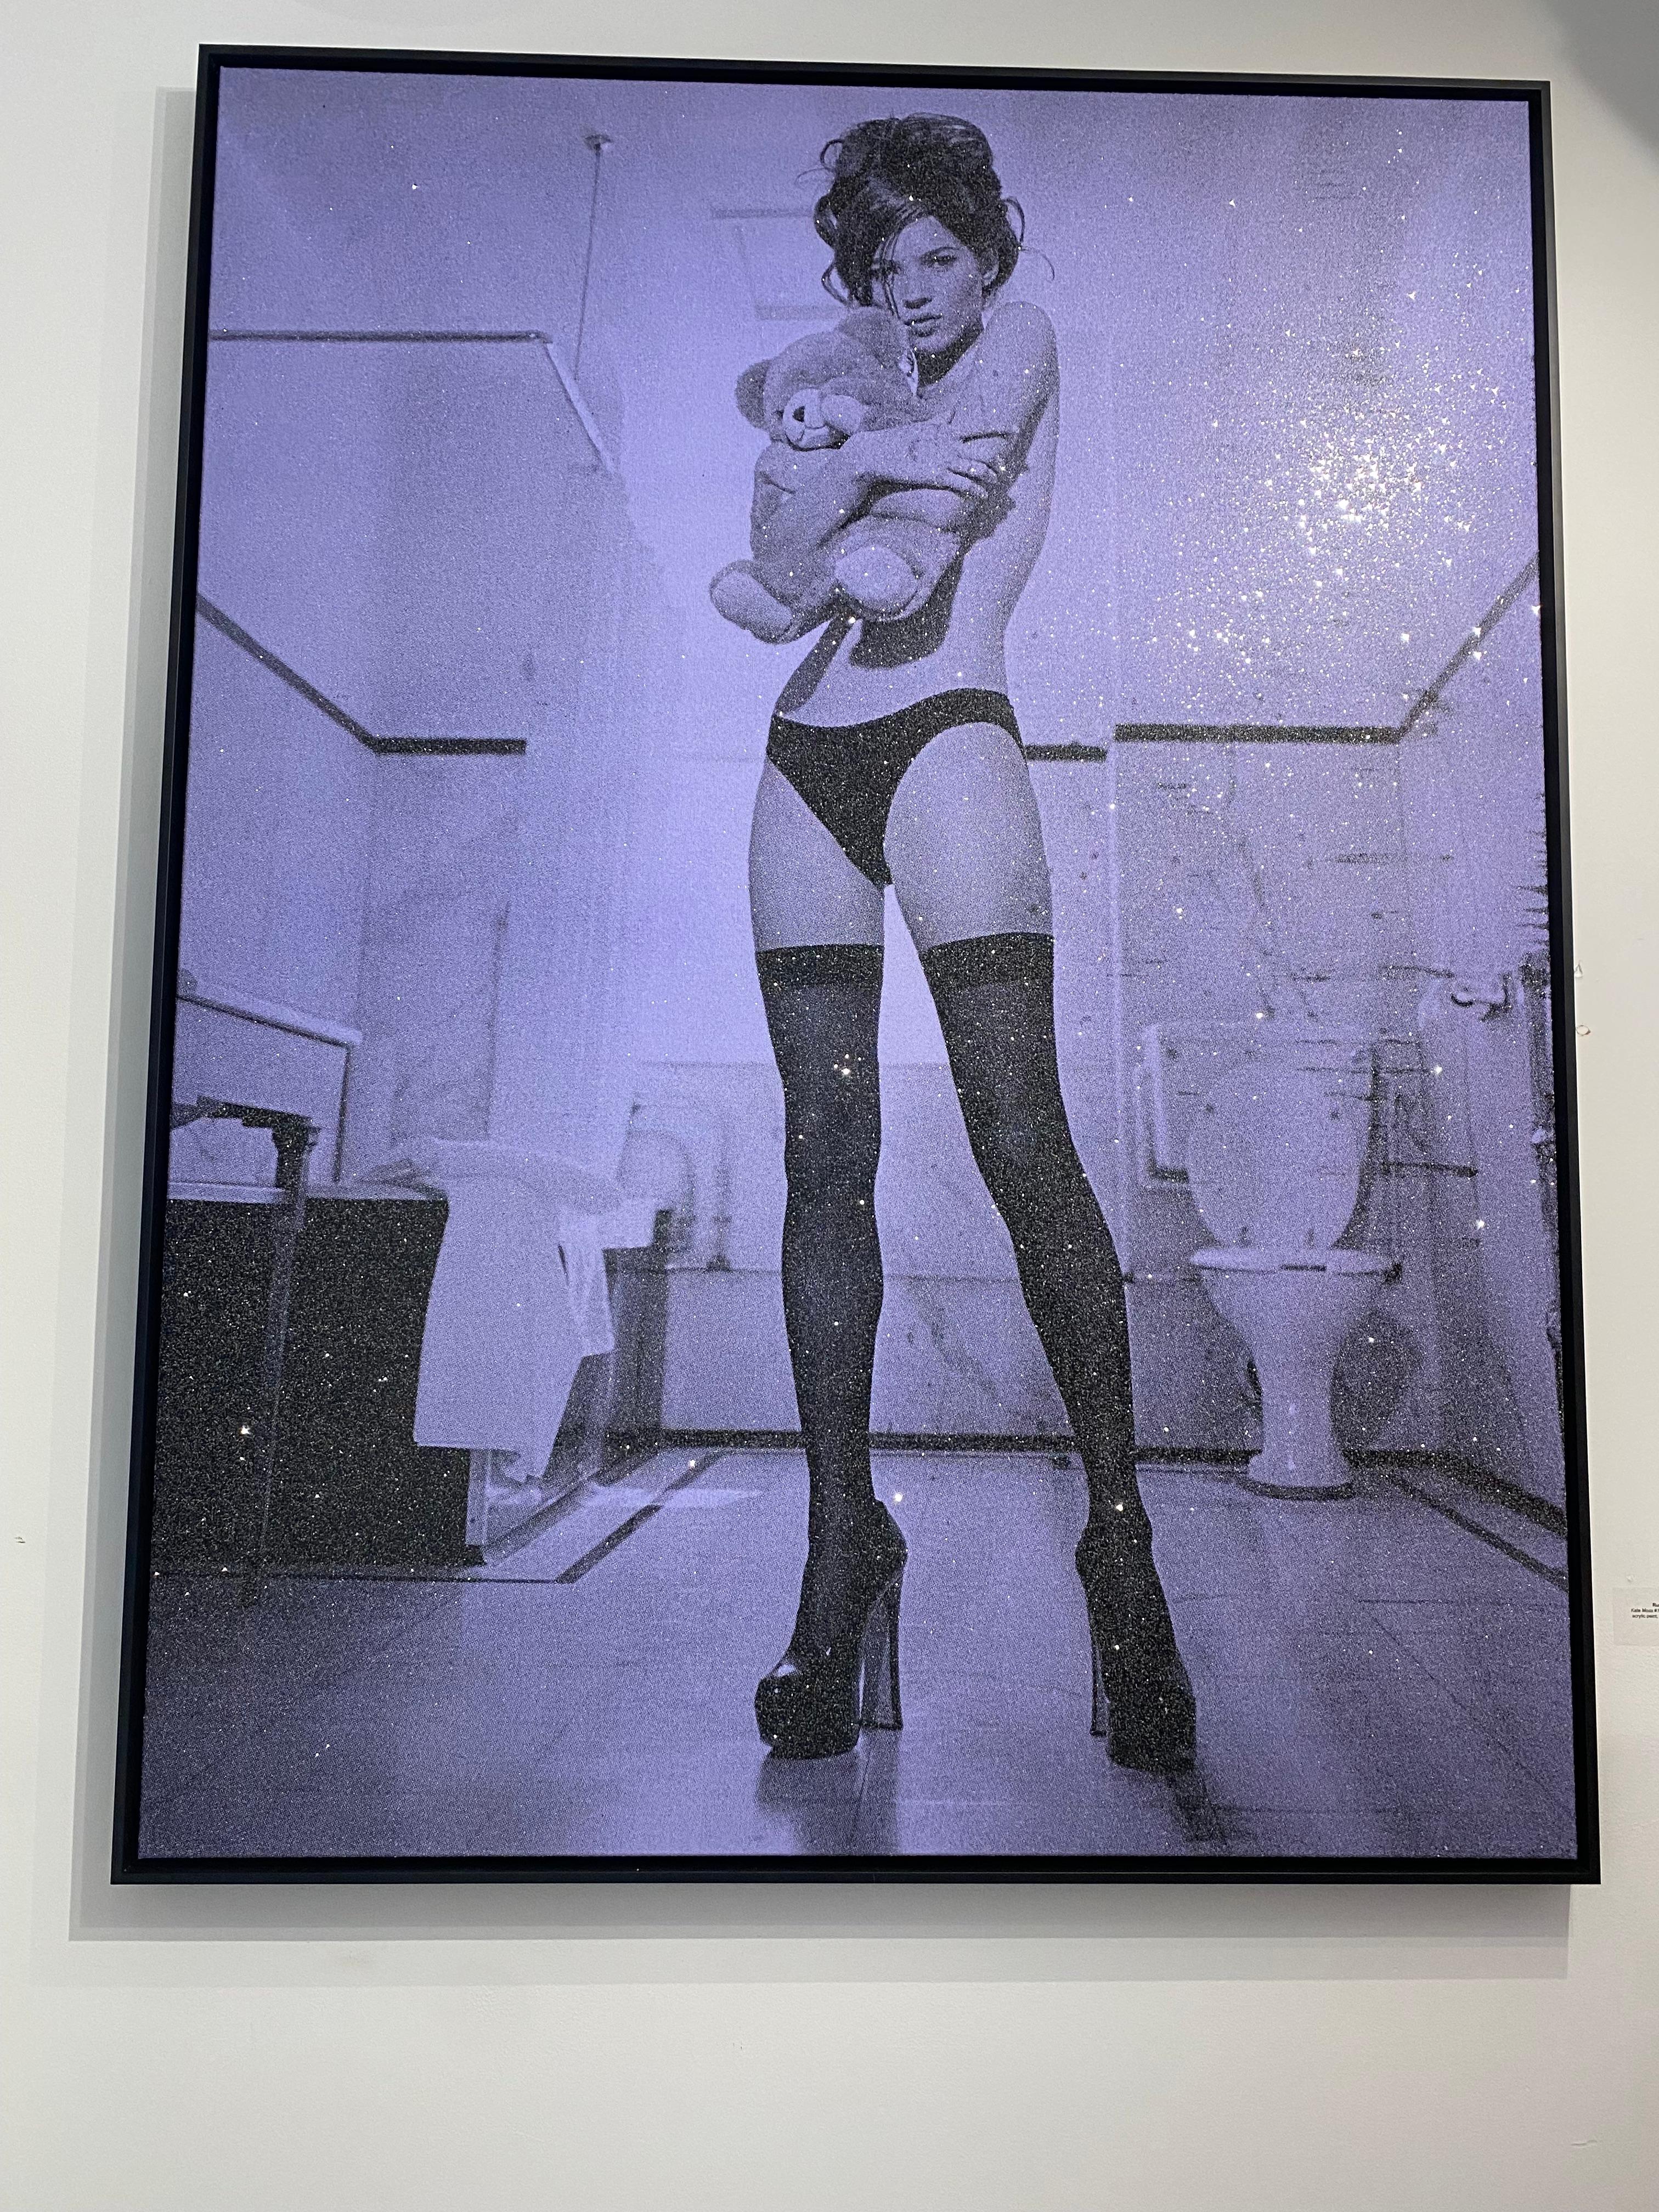 Fashion shot of Kate Moss.  Acrylic paint.  Hand pulled enamel screen print and diamond dust on linen.  Stretched on black frame. 

About the Artist:

Russell Young currently lives and works in California and Brooklyn. Having been featured in